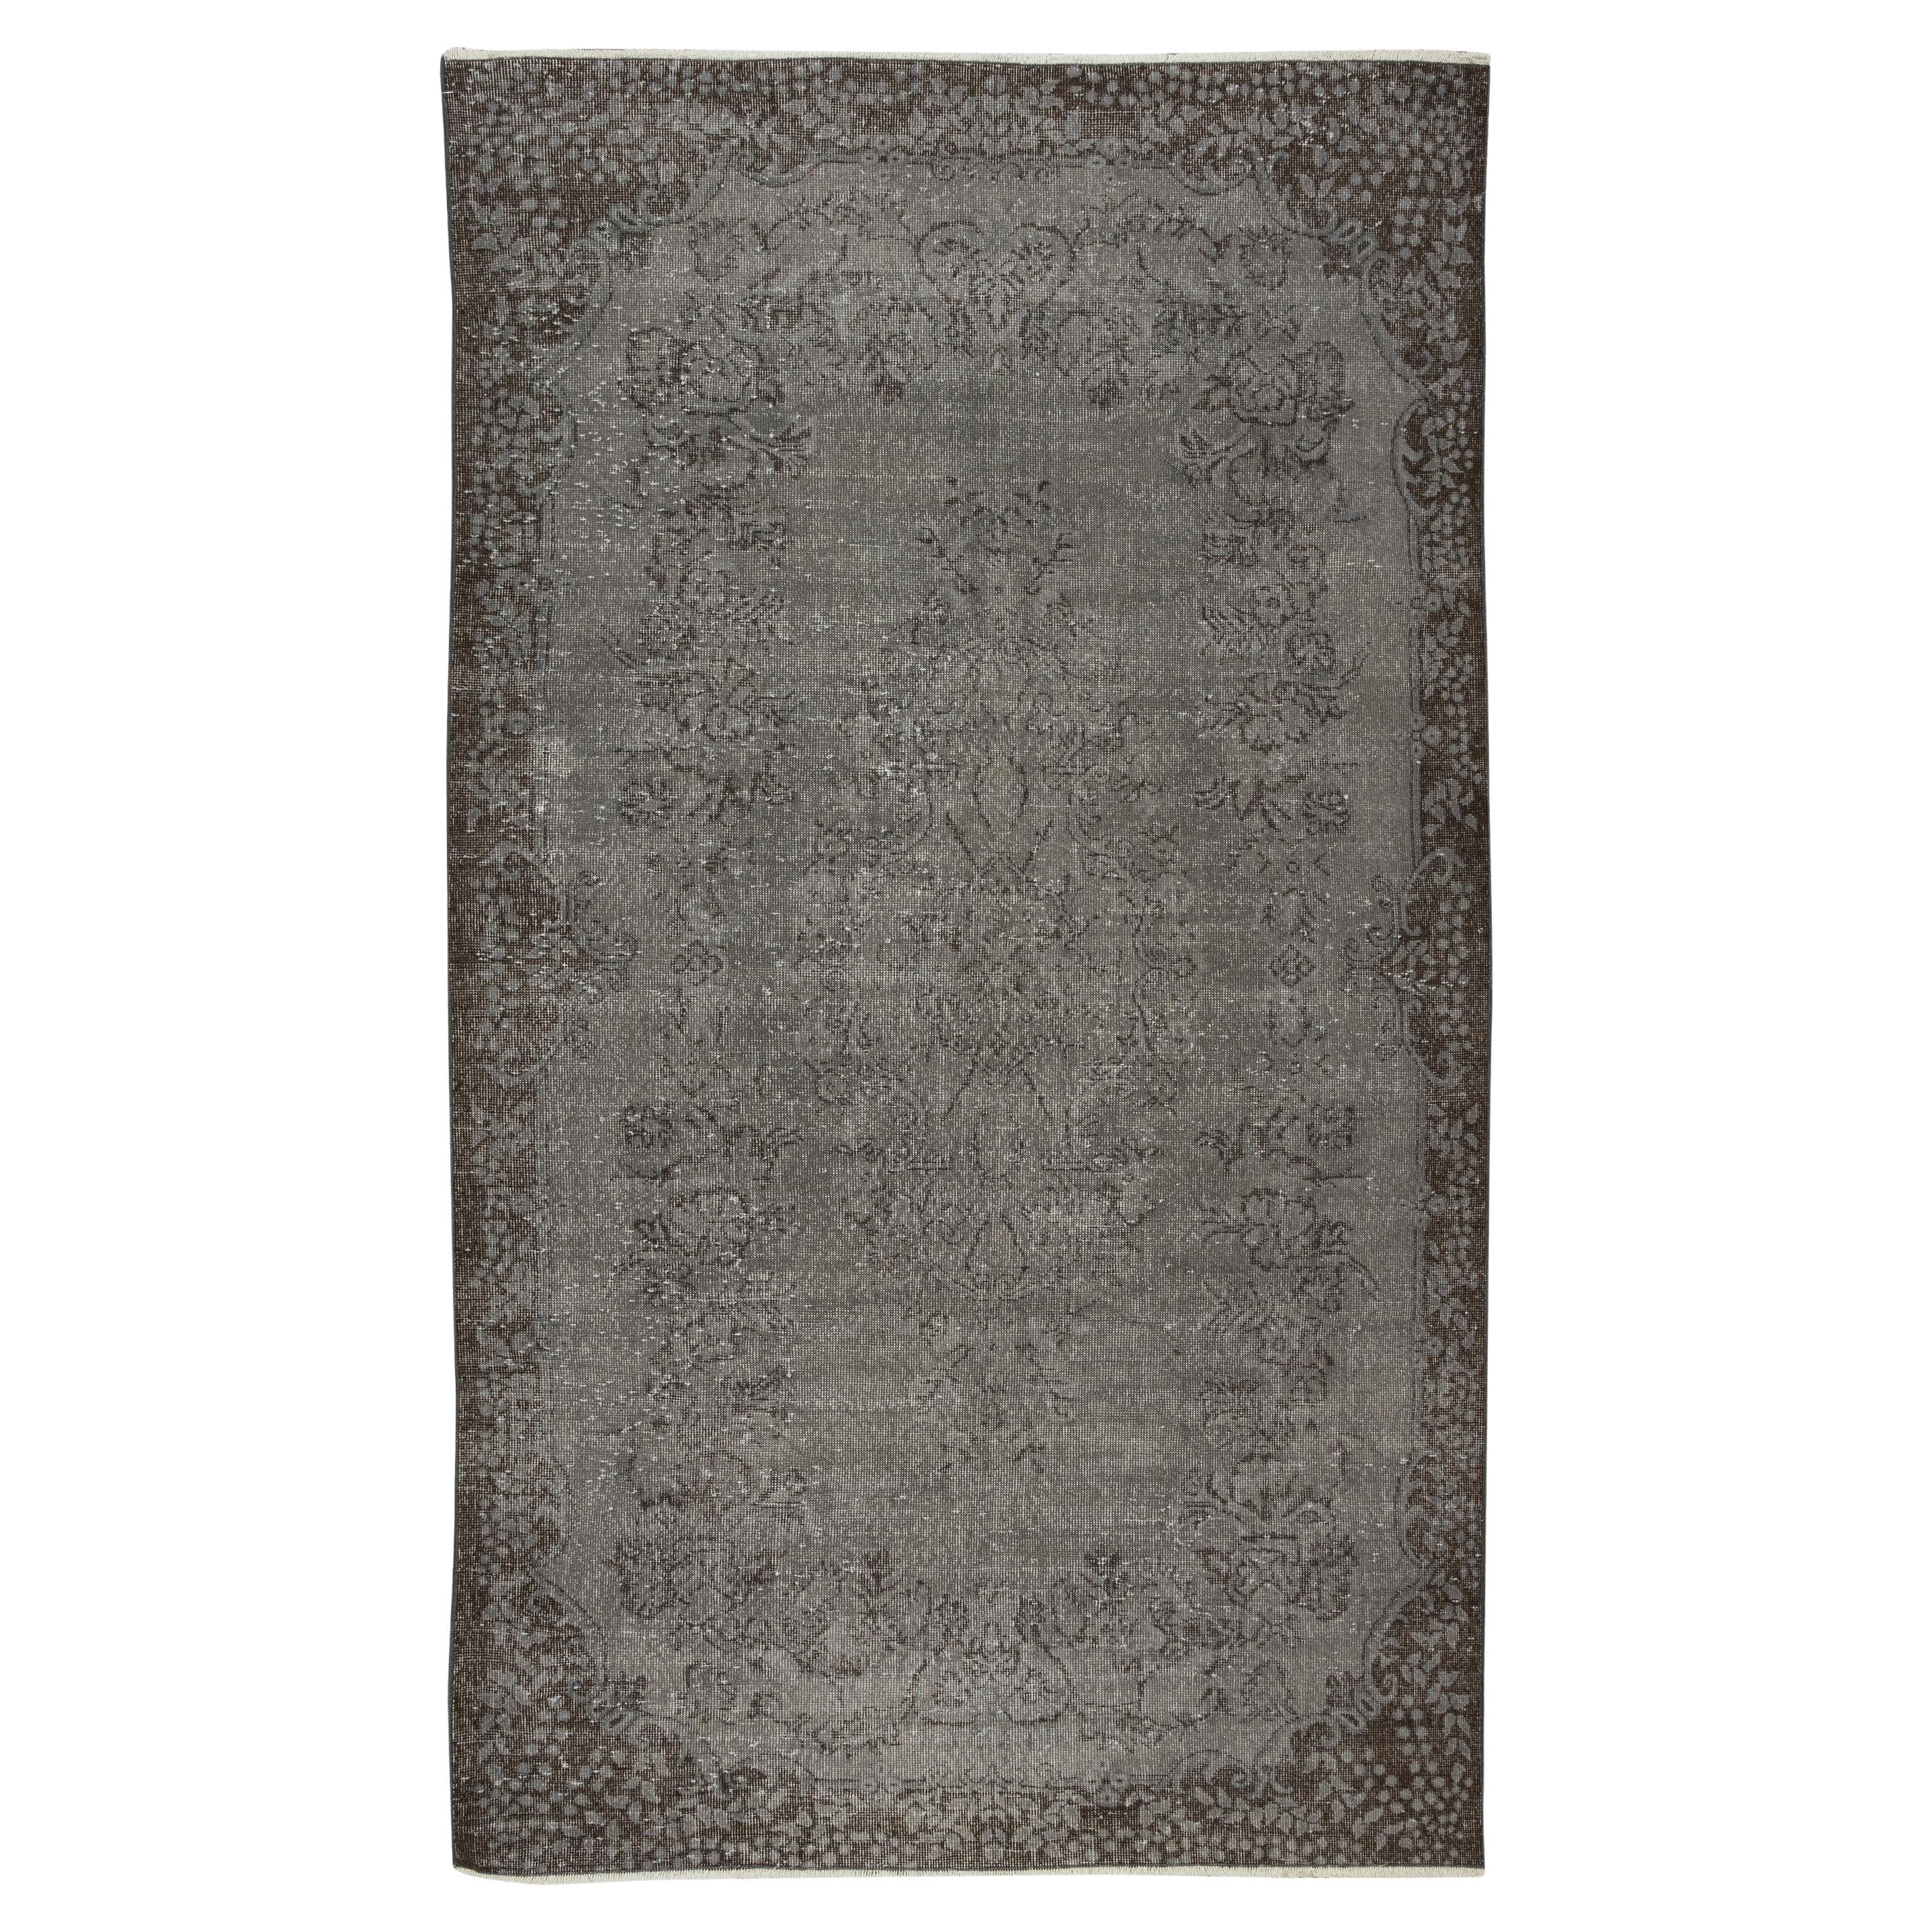 5.6x9.8 Ft Vintage Rug Over-Dyed in Gray for Modern Interior, Handmade in Turkey For Sale